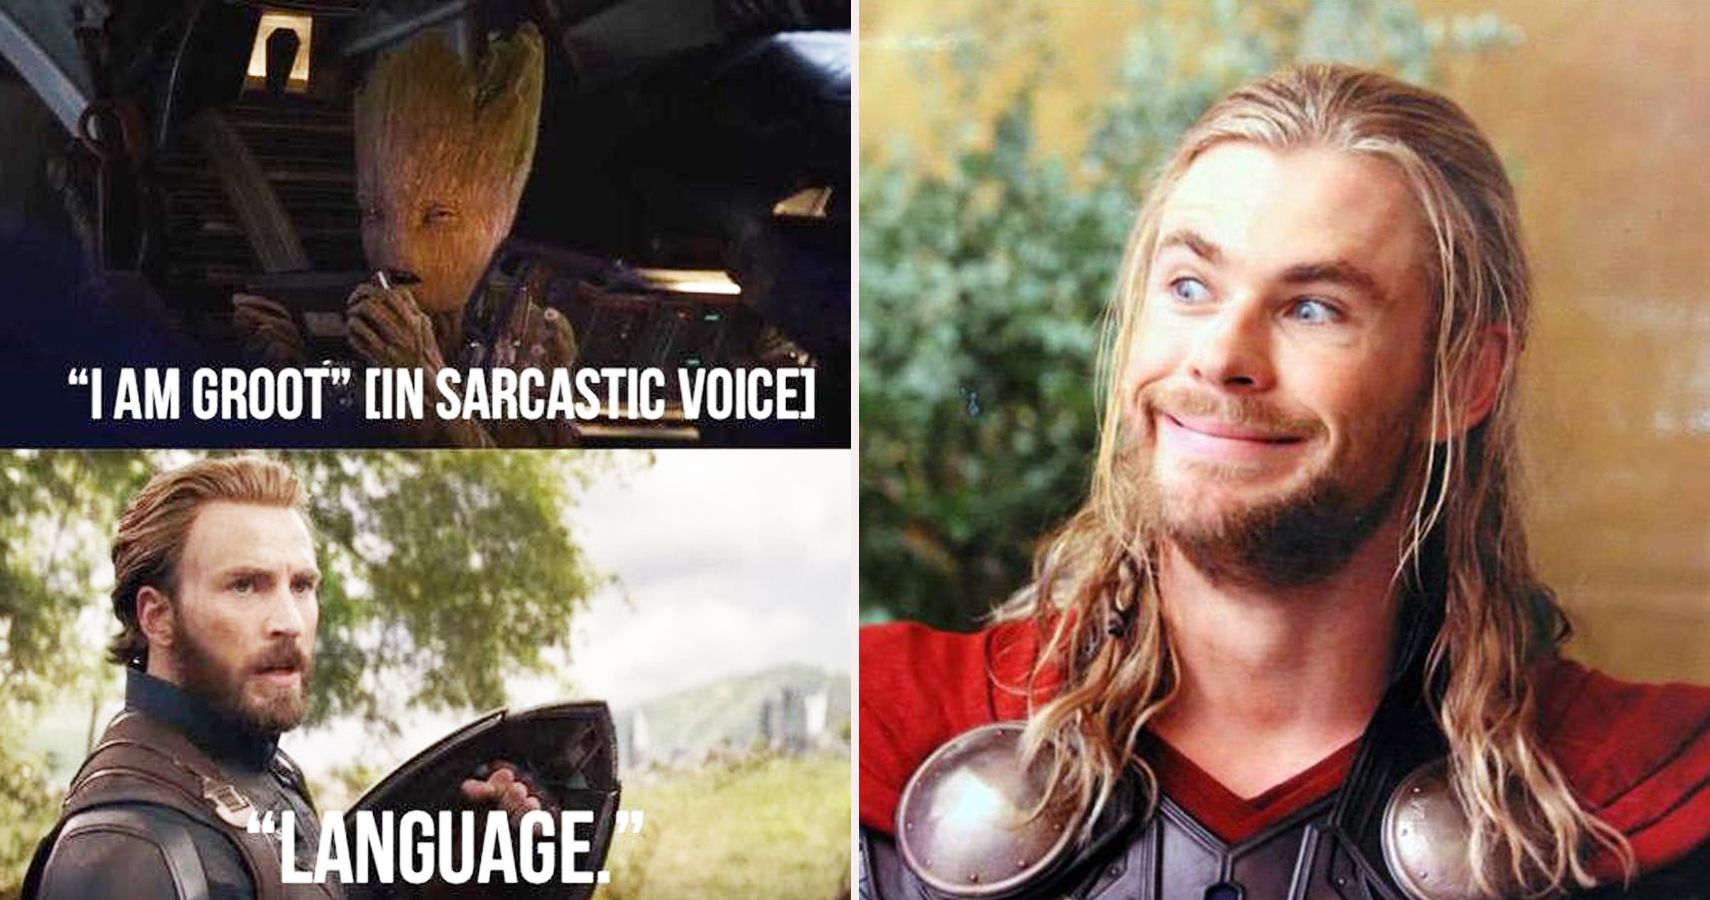 20 Avengers Infinity War Memes That Leave Us Laughing